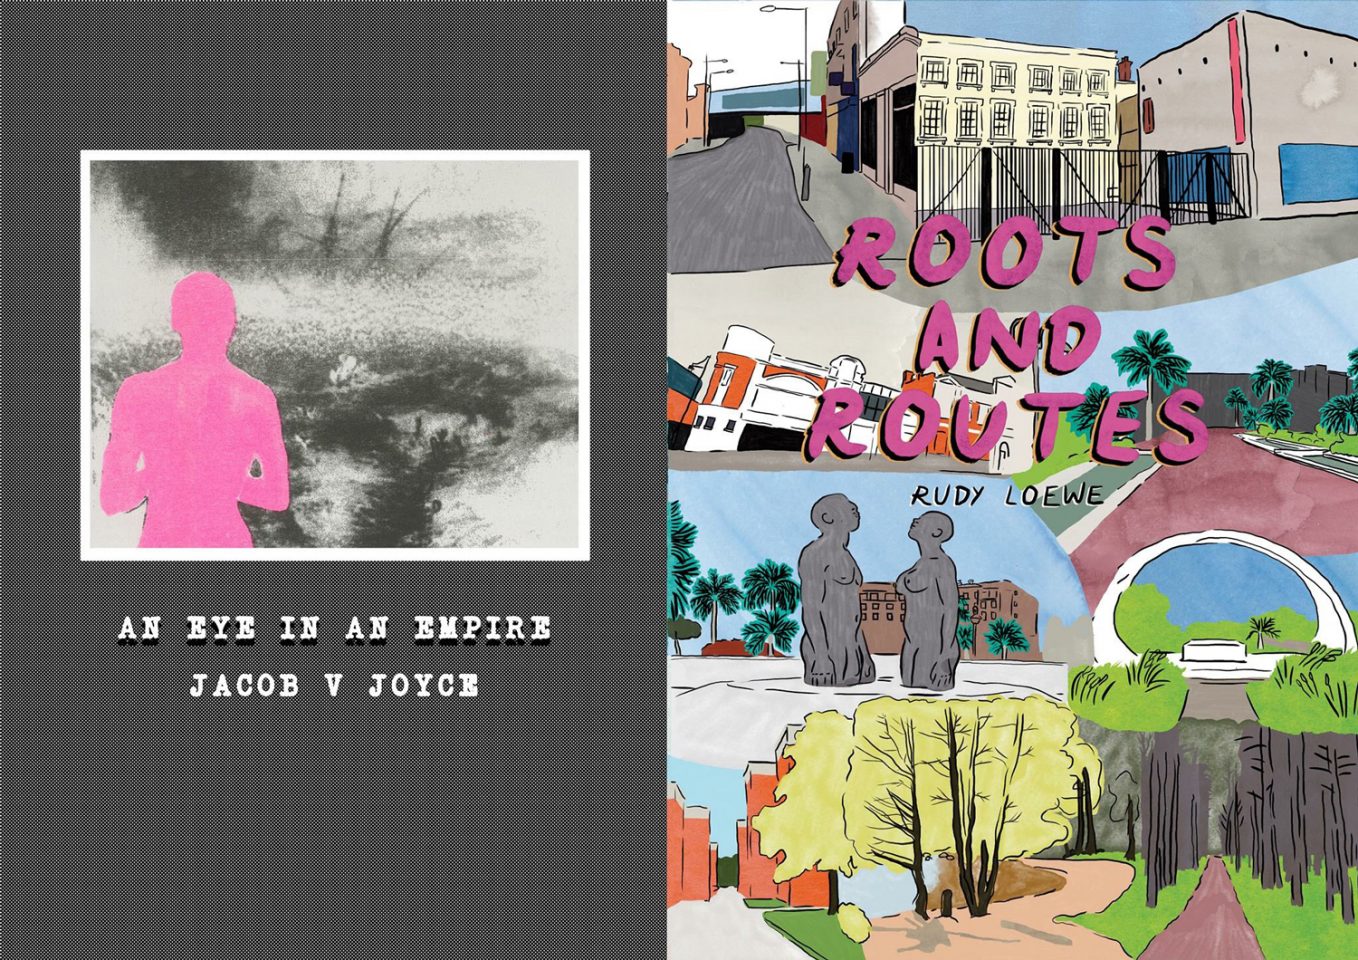 Jacob V Joyce, An Eye In Empire (2018) and Rudy Loewe, Roots and Routes (2018)